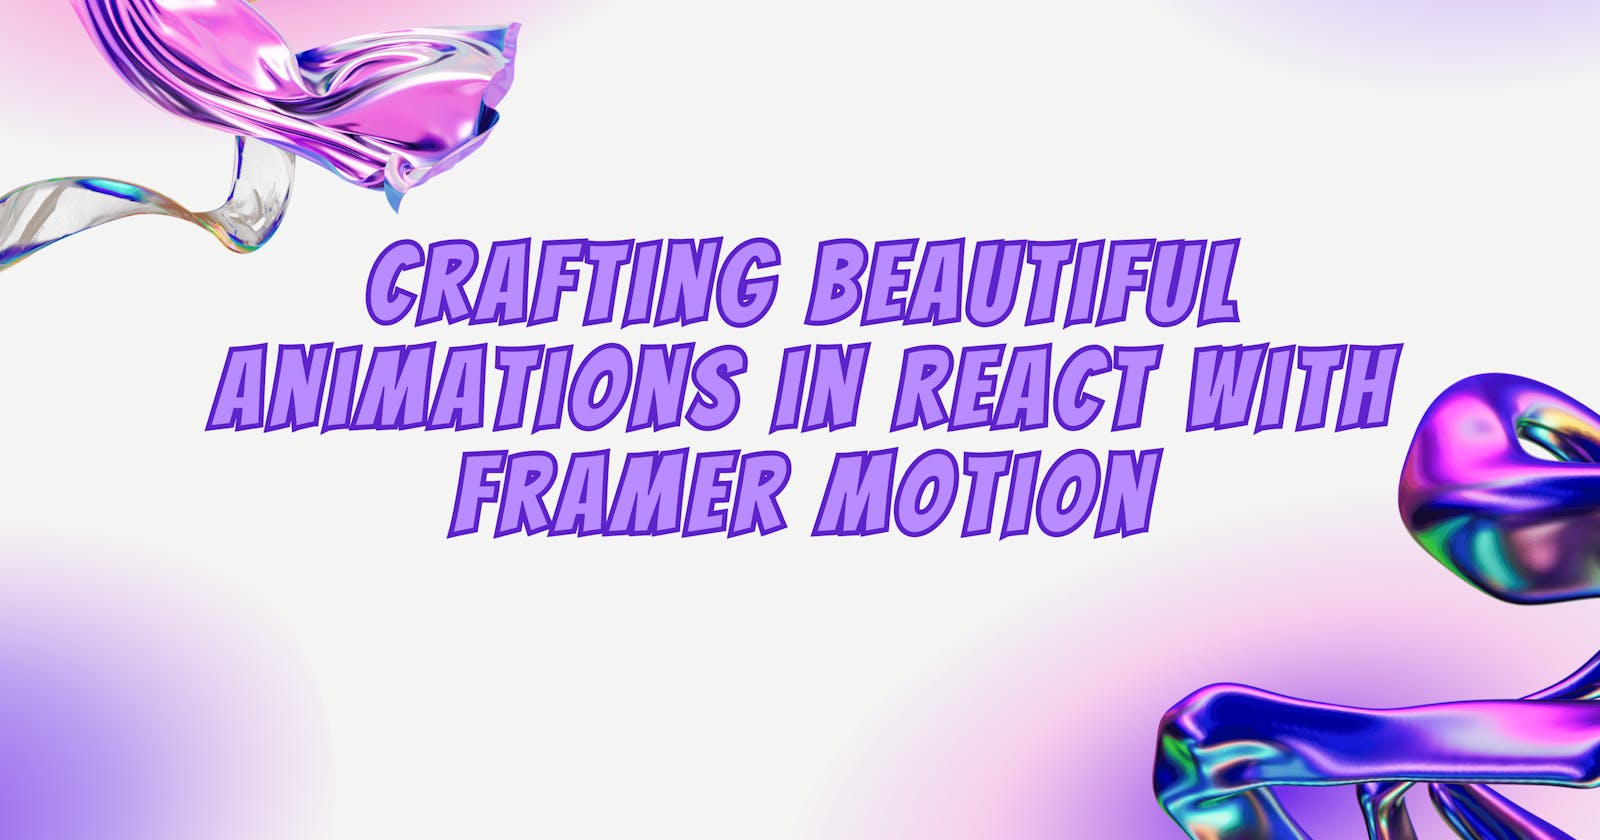 Crafting Beautiful Animations in React with Framer Motion